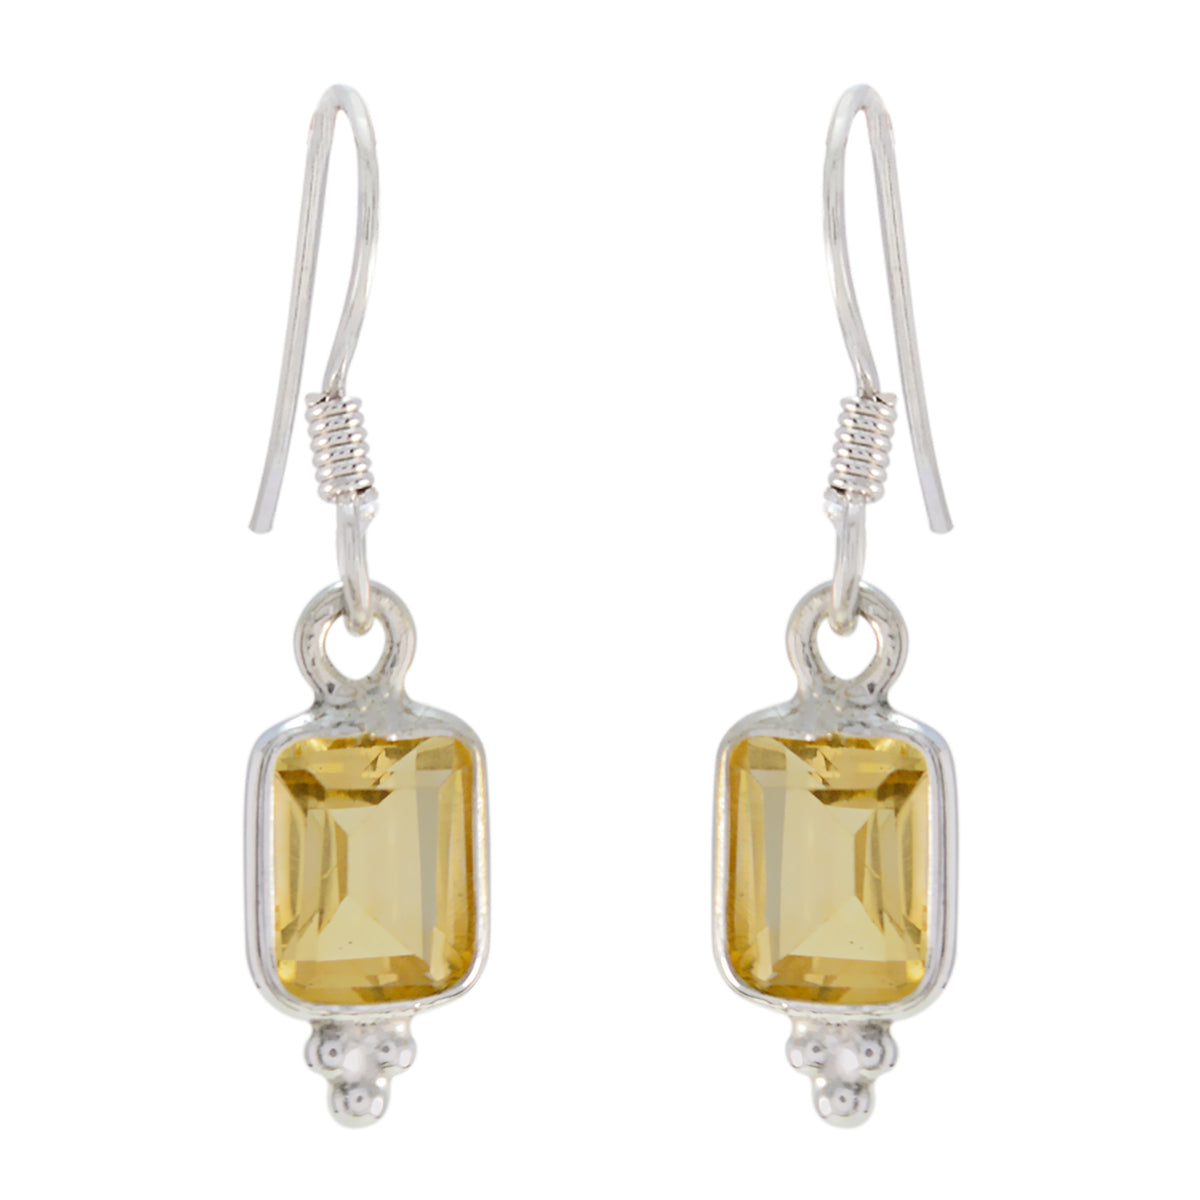 Riyo Real Gemstones Octogon Faceted Yellow Citrine Silver Earrings moms day gift